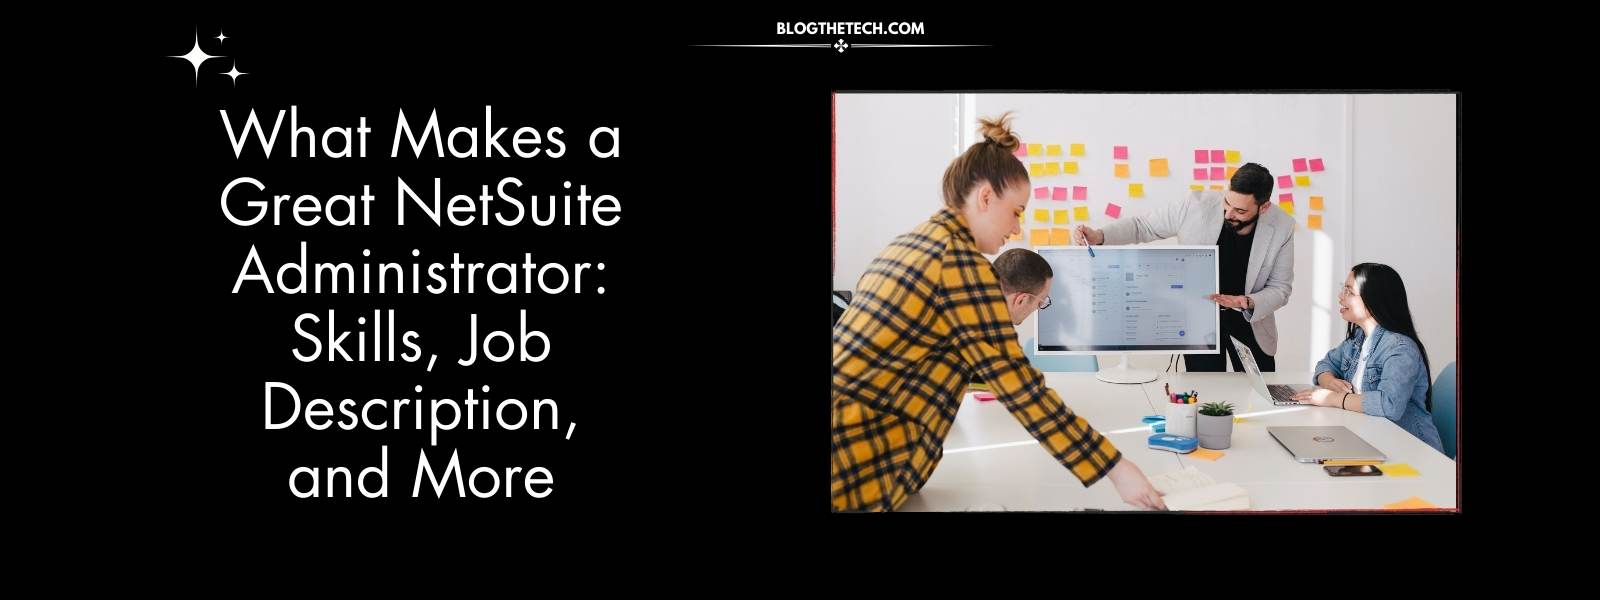 what-makes-a-great-netsuite-administrator-featured